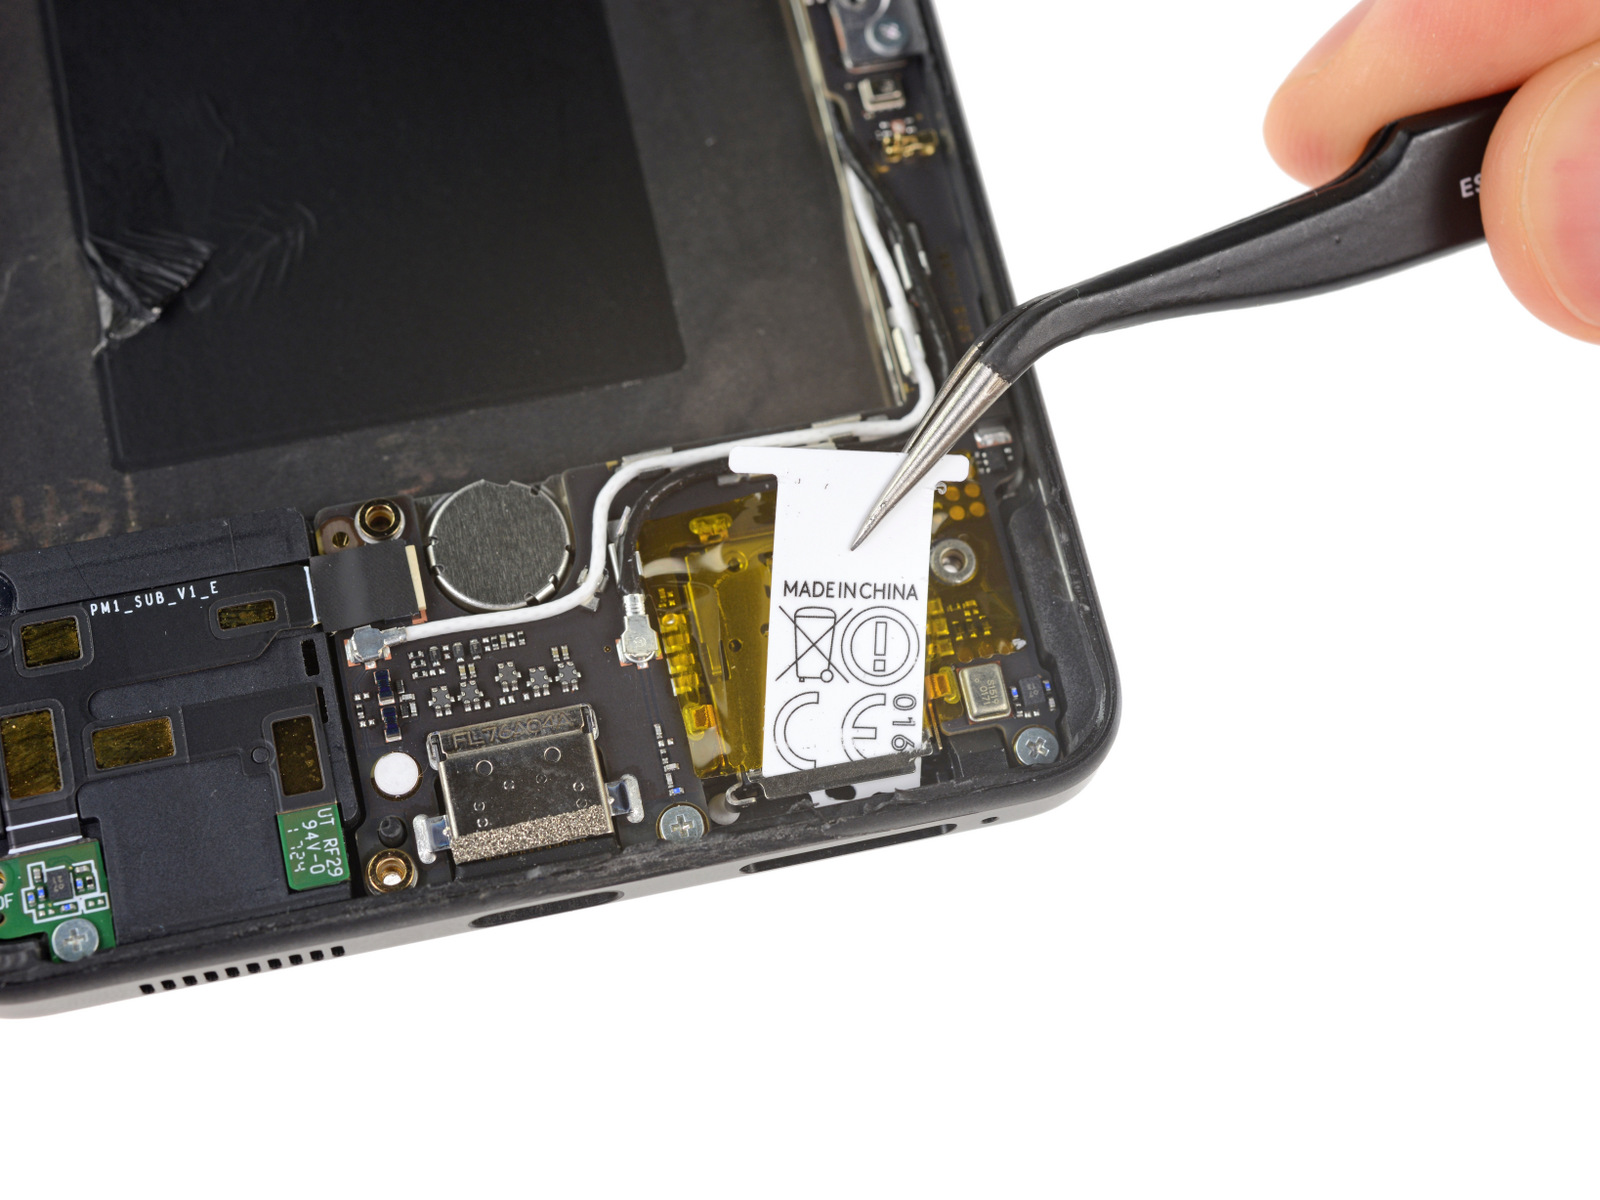 Ben_trong_Essential_Phone_iFixit_10.jpeg